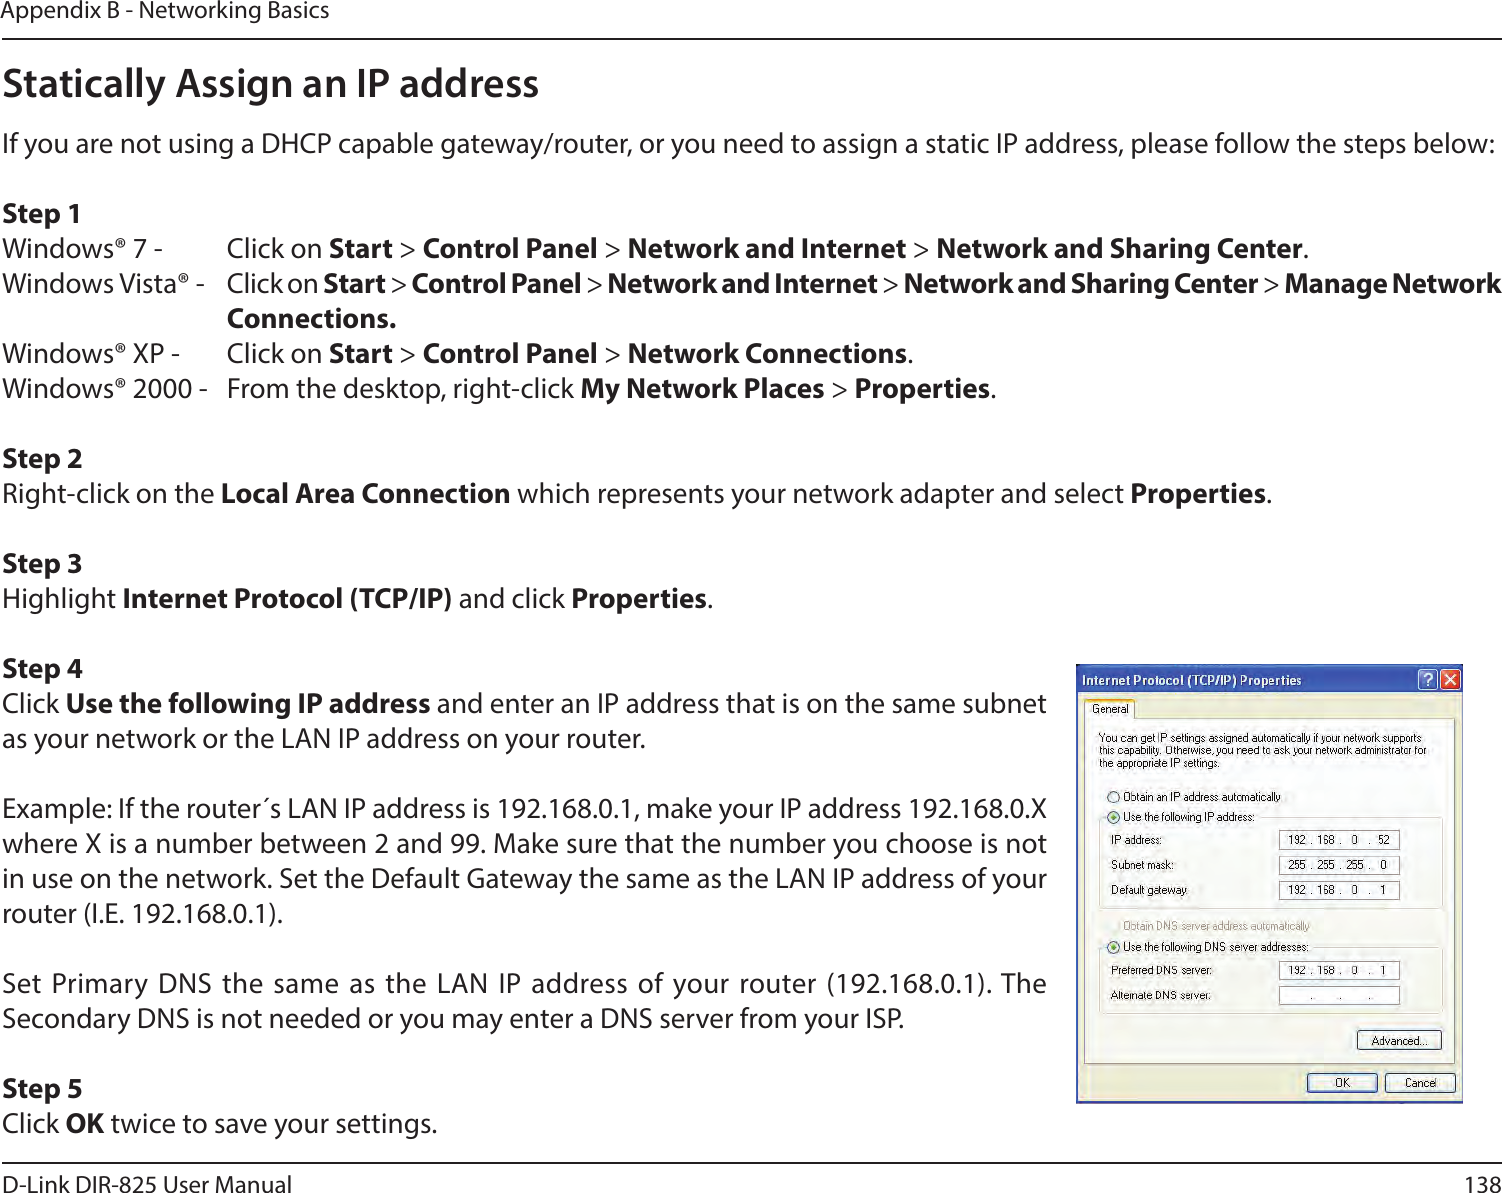 138D-Link DIR-825 User ManualAppendix B - Networking BasicsStatically Assign an IP addressIf you are not using a DHCP capable gateway/router, or you need to assign a static IP address, please follow the steps below:Step 1Windows® 7 -  Click on Start &gt; Control Panel &gt; Network and Internet &gt; Network and Sharing Center.Windows Vista® -  Click on Start &gt; Control Panel &gt; Network and Internet &gt; Network and Sharing Center &gt; Manage Network    Connections.Windows® XP -  Click on Start &gt; Control Panel &gt; Network Connections.Windows® 2000 -  From the desktop, right-click My Network Places &gt; Properties.Step 2Right-click on the Local Area Connection which represents your network adapter and select Properties.Step 3Highlight Internet Protocol (TCP/IP) and click Properties.Step 4Click Use the following IP address and enter an IP address that is on the same subnet as your network or the LAN IP address on your router. Example: If the router´s LAN IP address is 192.168.0.1, make your IP address 192.168.0.X where X is a number between 2 and 99. Make sure that the number you choose is not in use on the network. Set the Default Gateway the same as the LAN IP address of your router (I.E. 192.168.0.1). Set Primary DNS the same as the LAN IP address of your router (192.168.0.1). The Secondary DNS is not needed or you may enter a DNS server from your ISP.Step 5Click OK twice to save your settings.